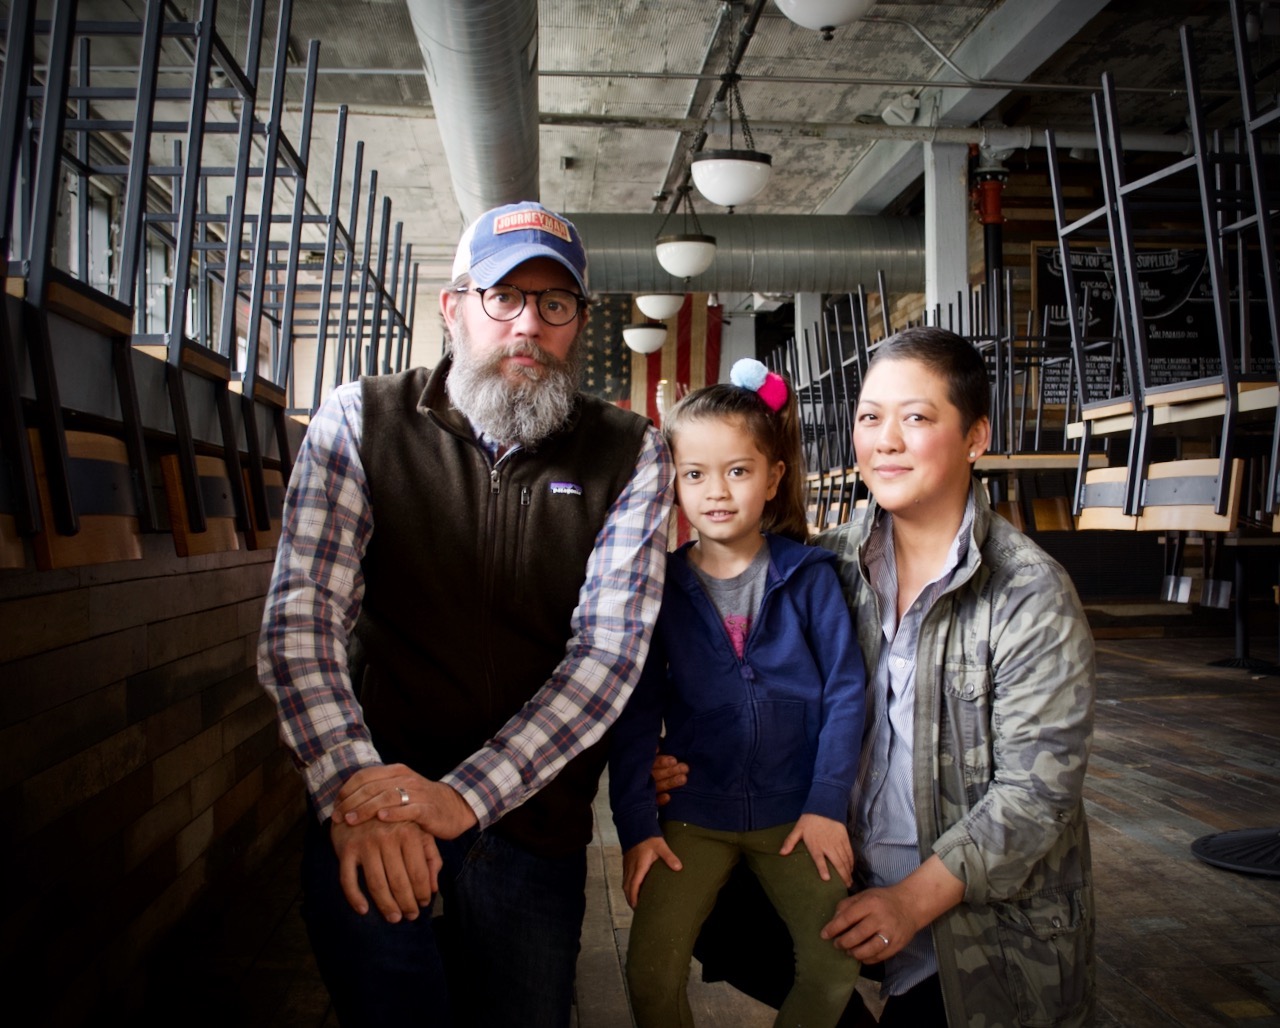 Bill and Johanna Welter, founders of Journeyman Distillery, and their daughter Islay.